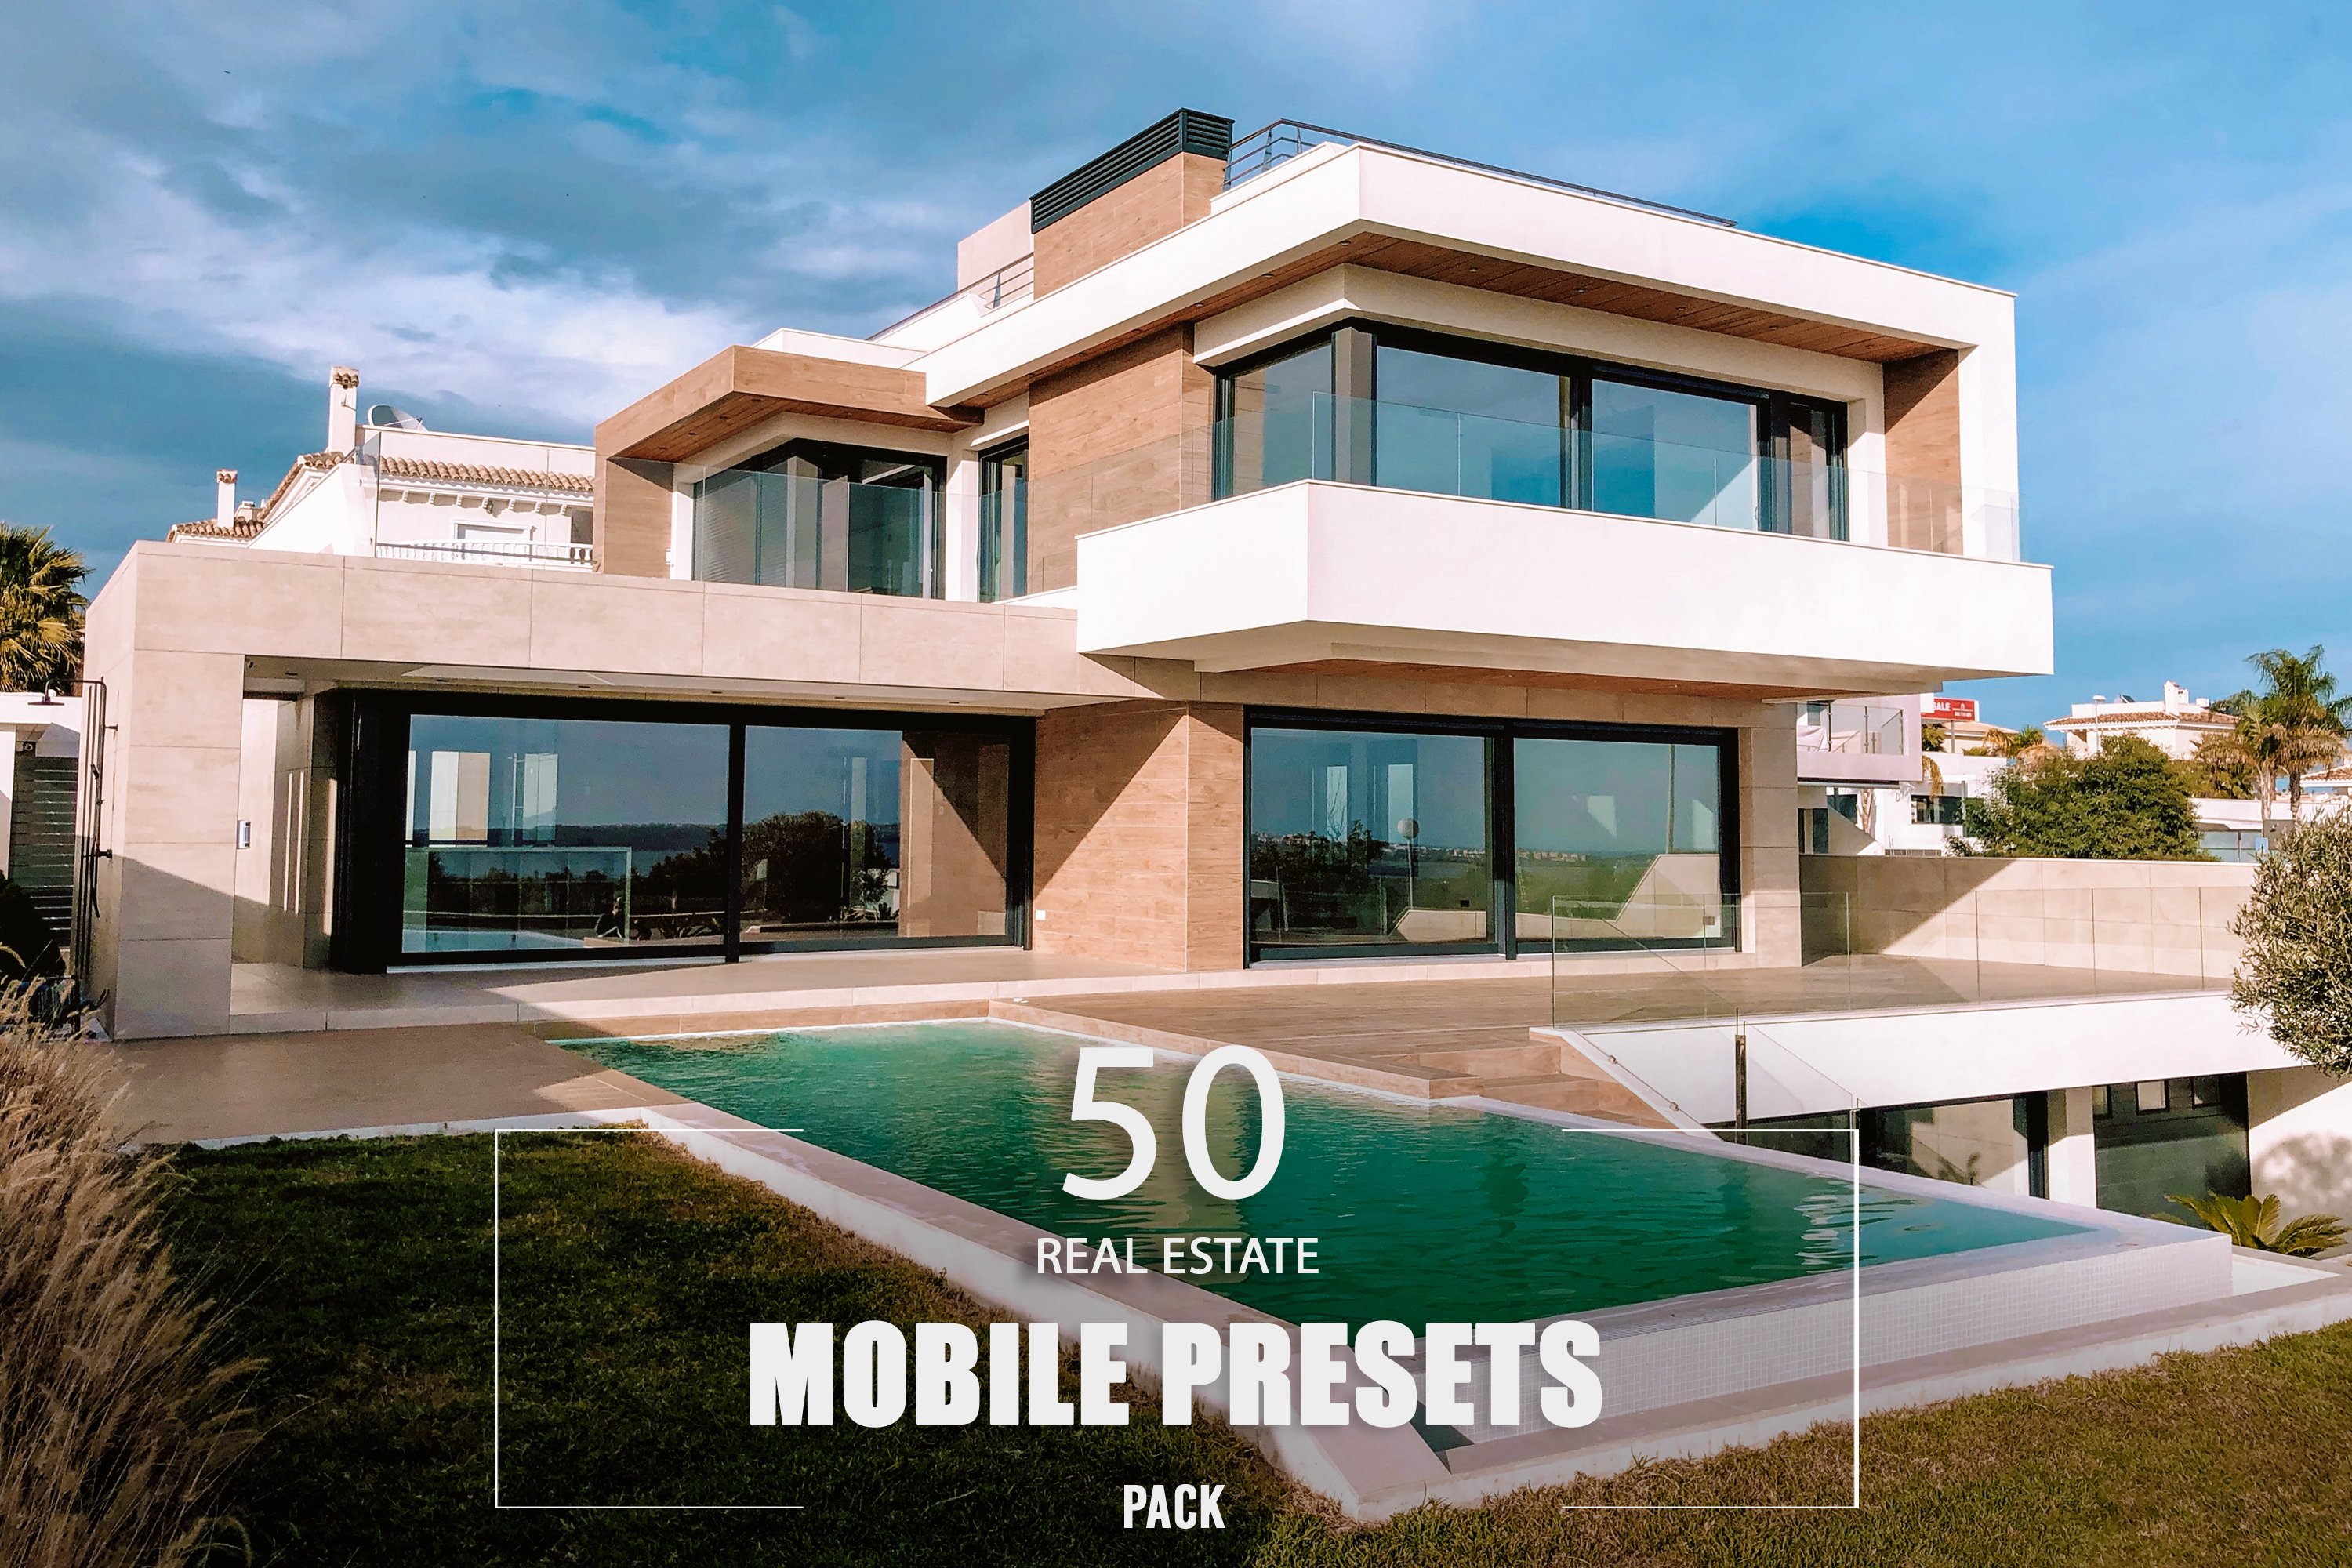 50 Real Estate Mobile Presets Packcover image.